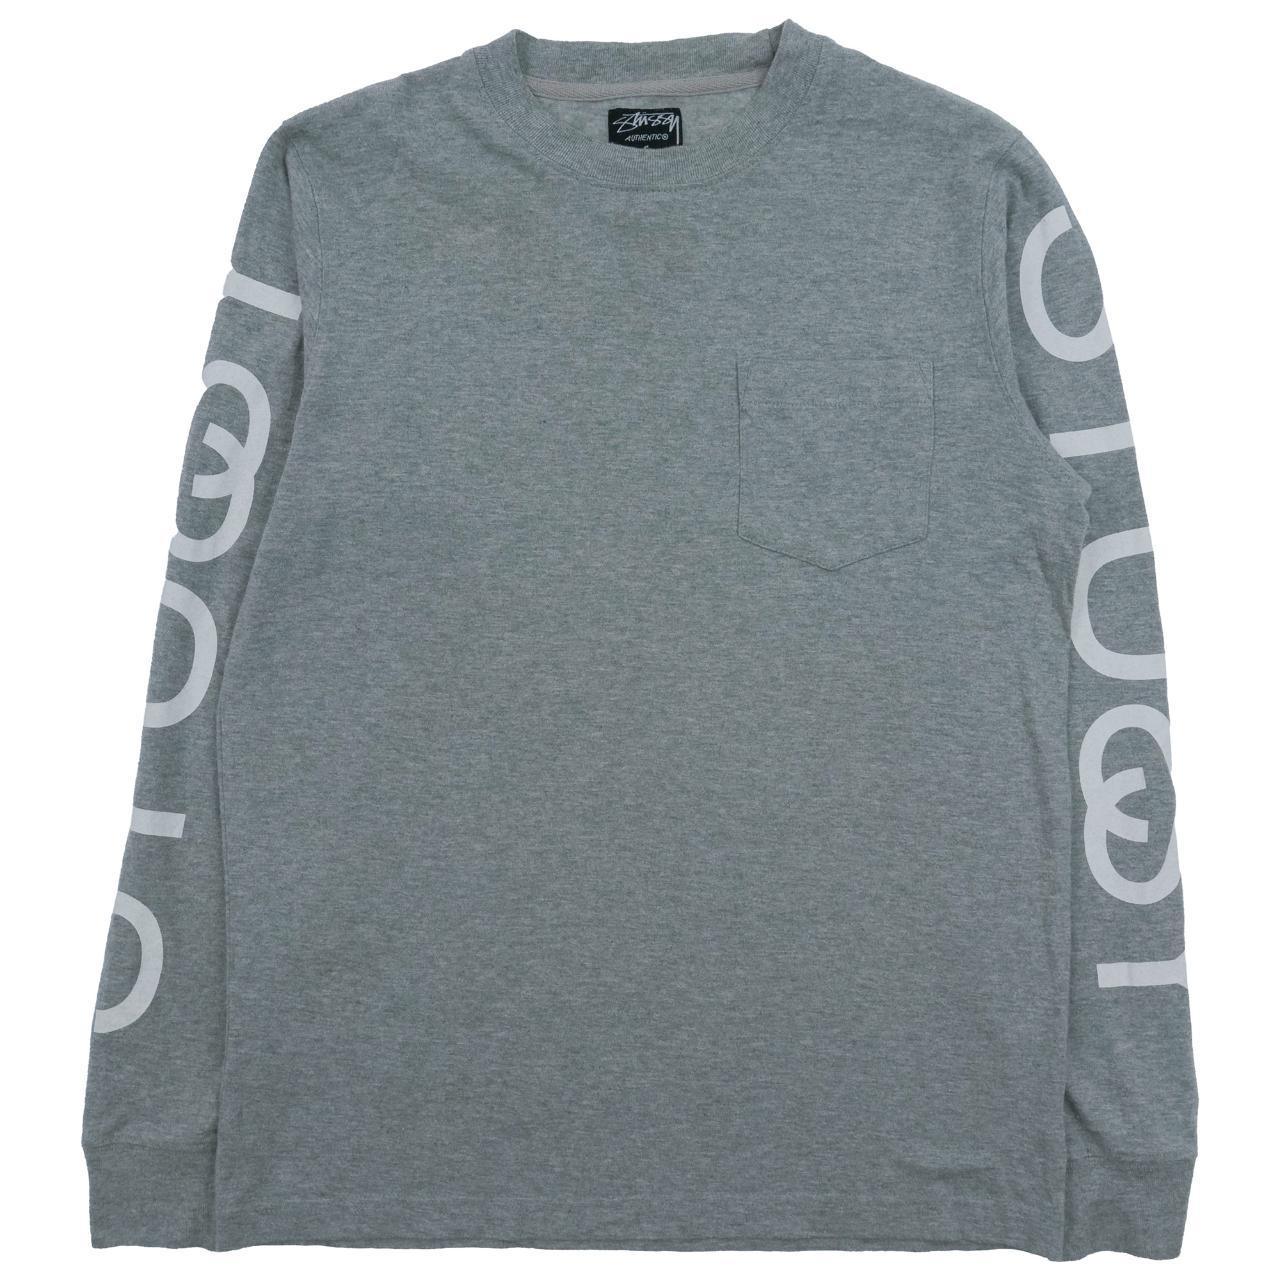 Vintage Stussy Long Sleeve Size S - Known Source